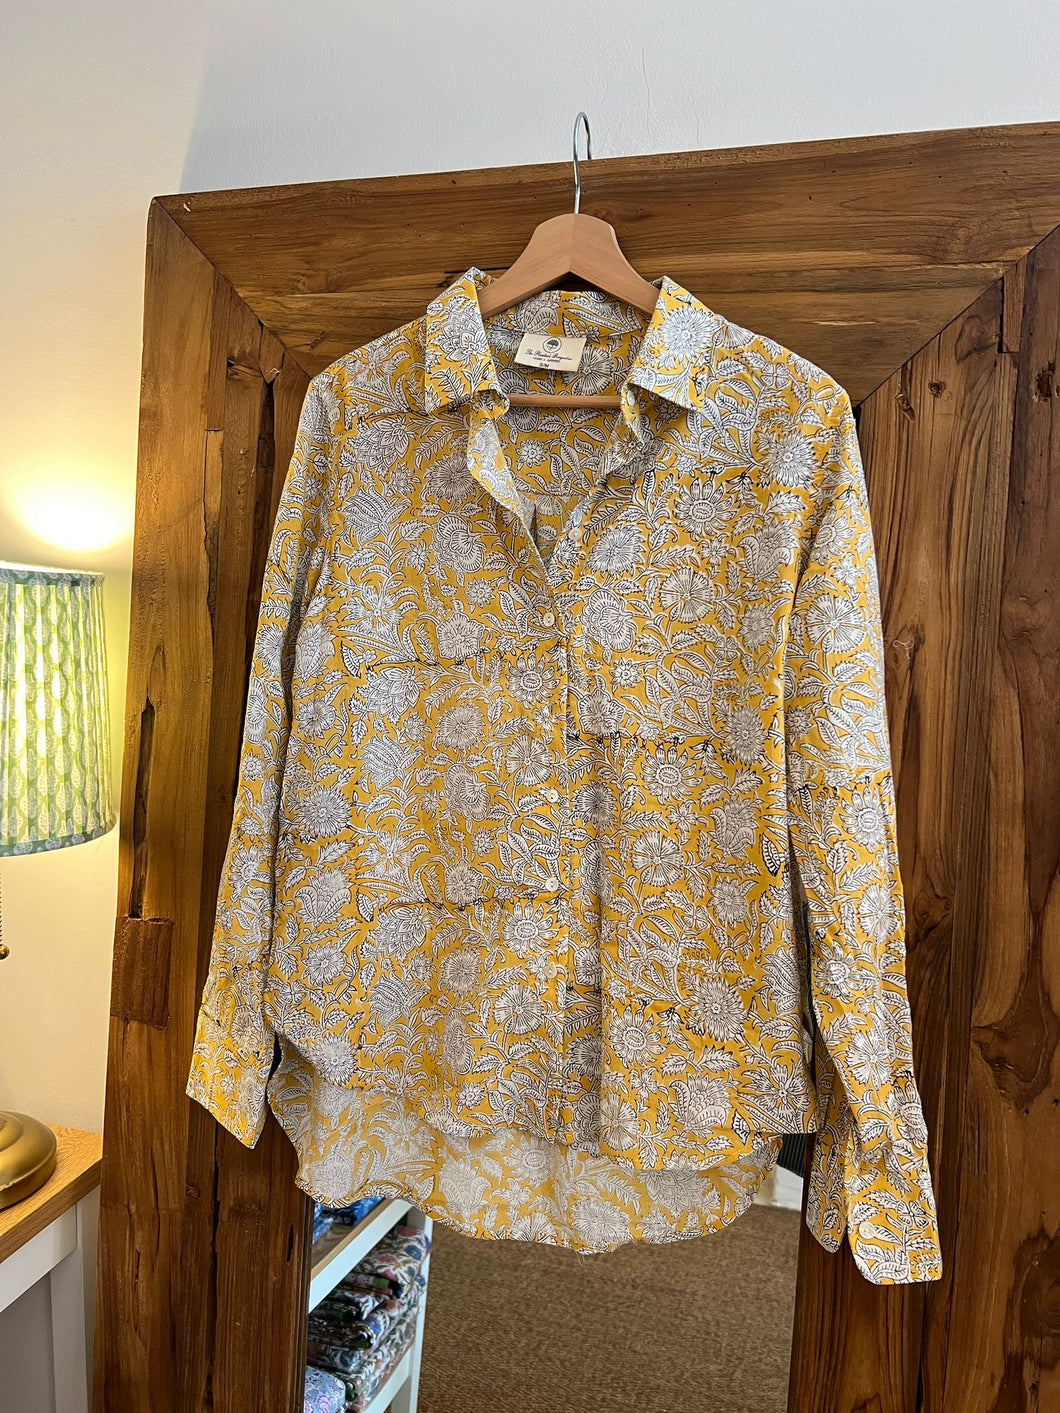 The BASIC shirt - yellow floral